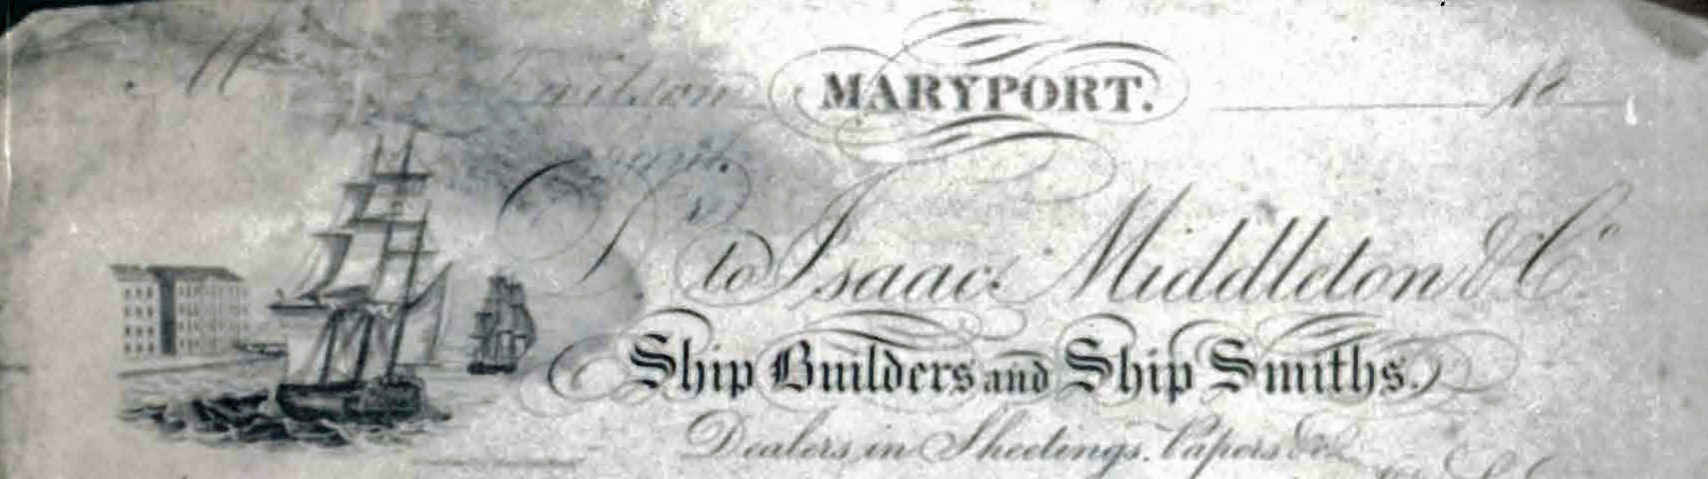 Advert Isaac Middleton Ship Builders and Ship Smiths 1820 1860